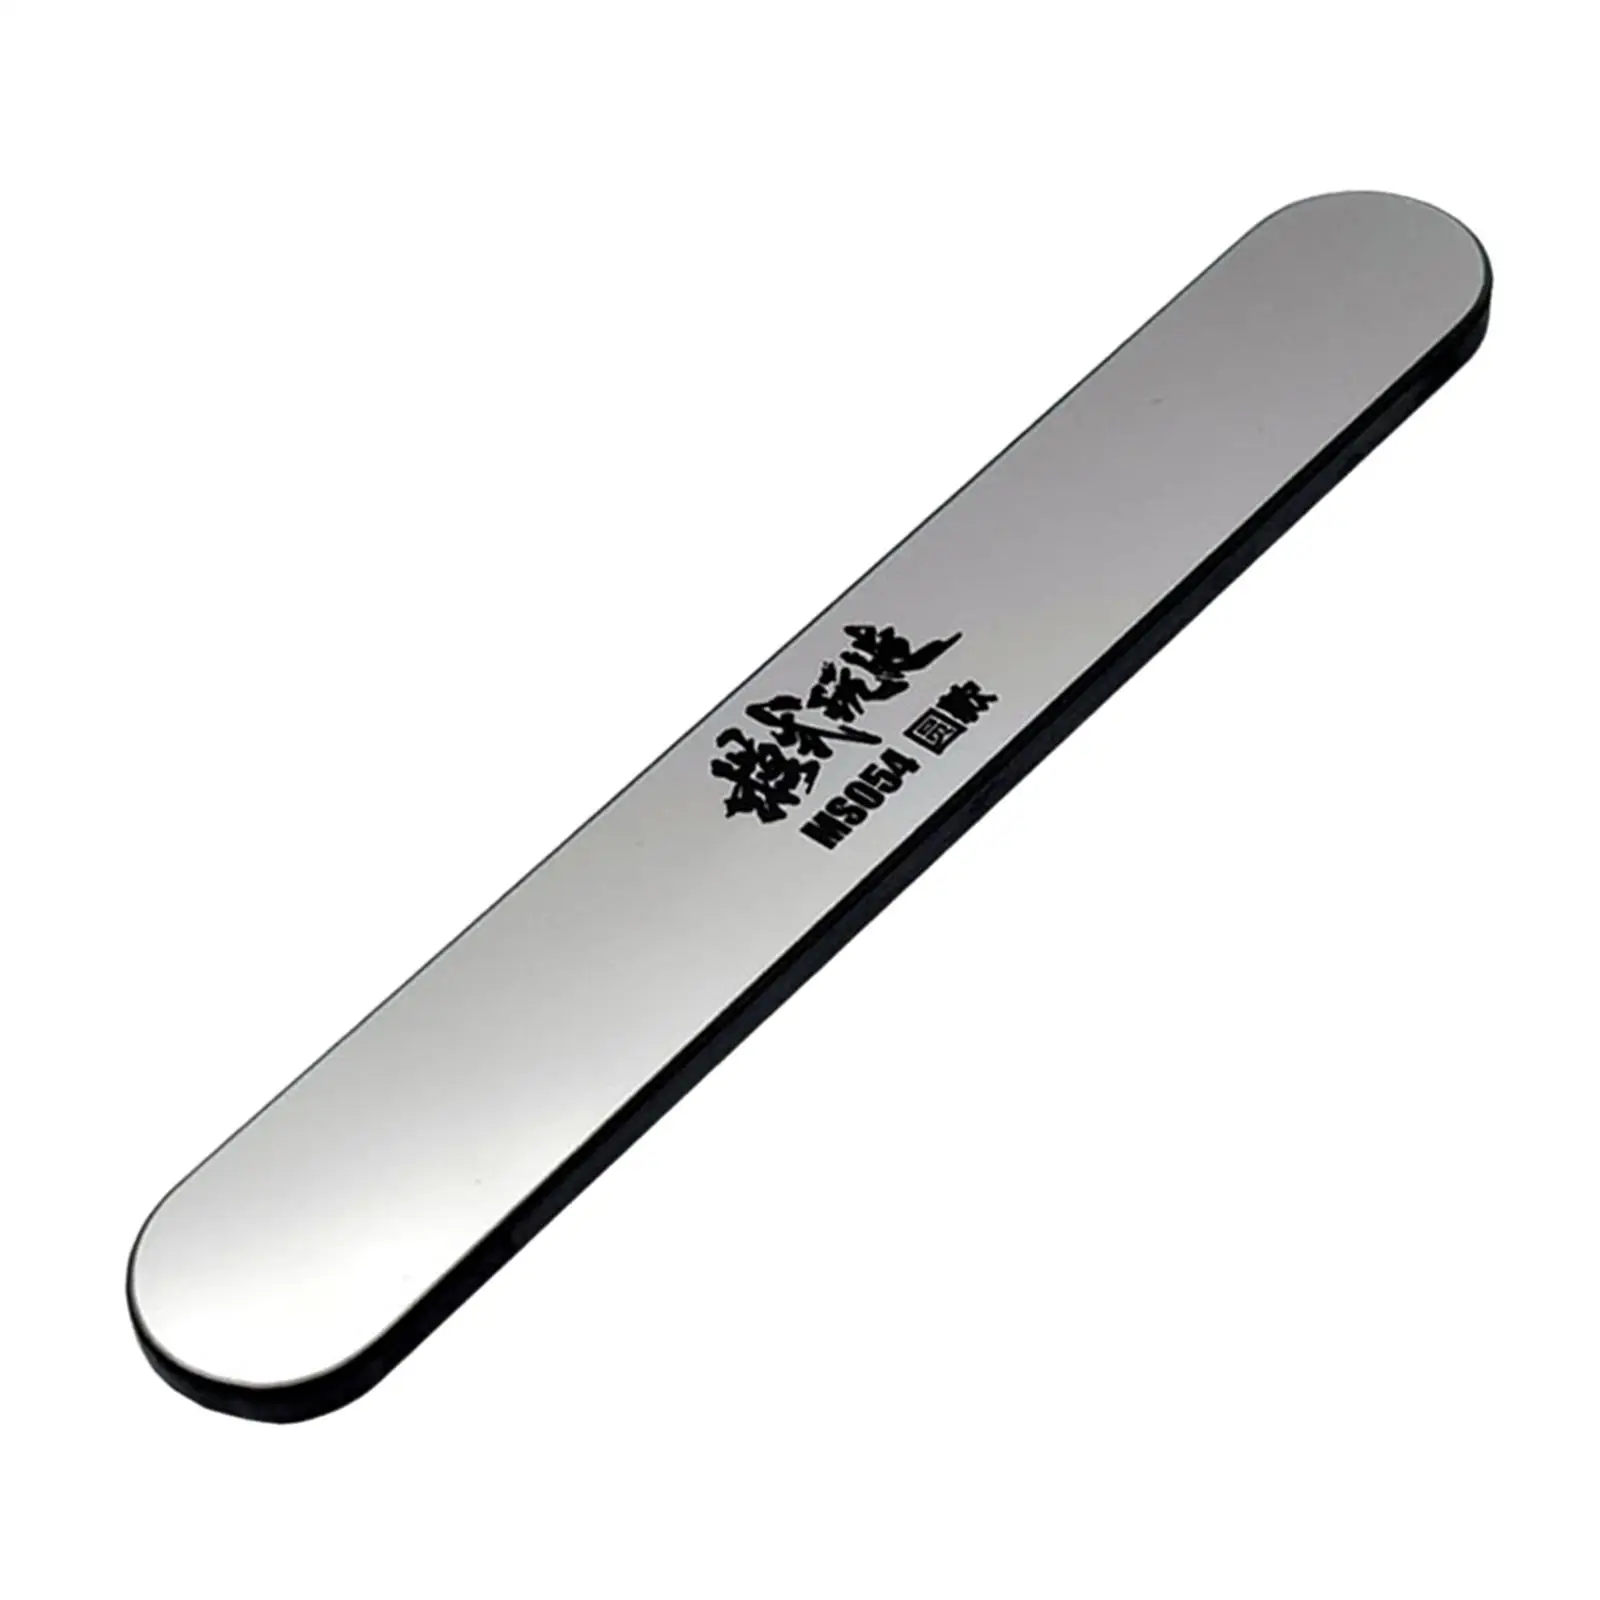 Precision Glass File for Gundam Model and for Car and Plane Kits Hobby Polishing